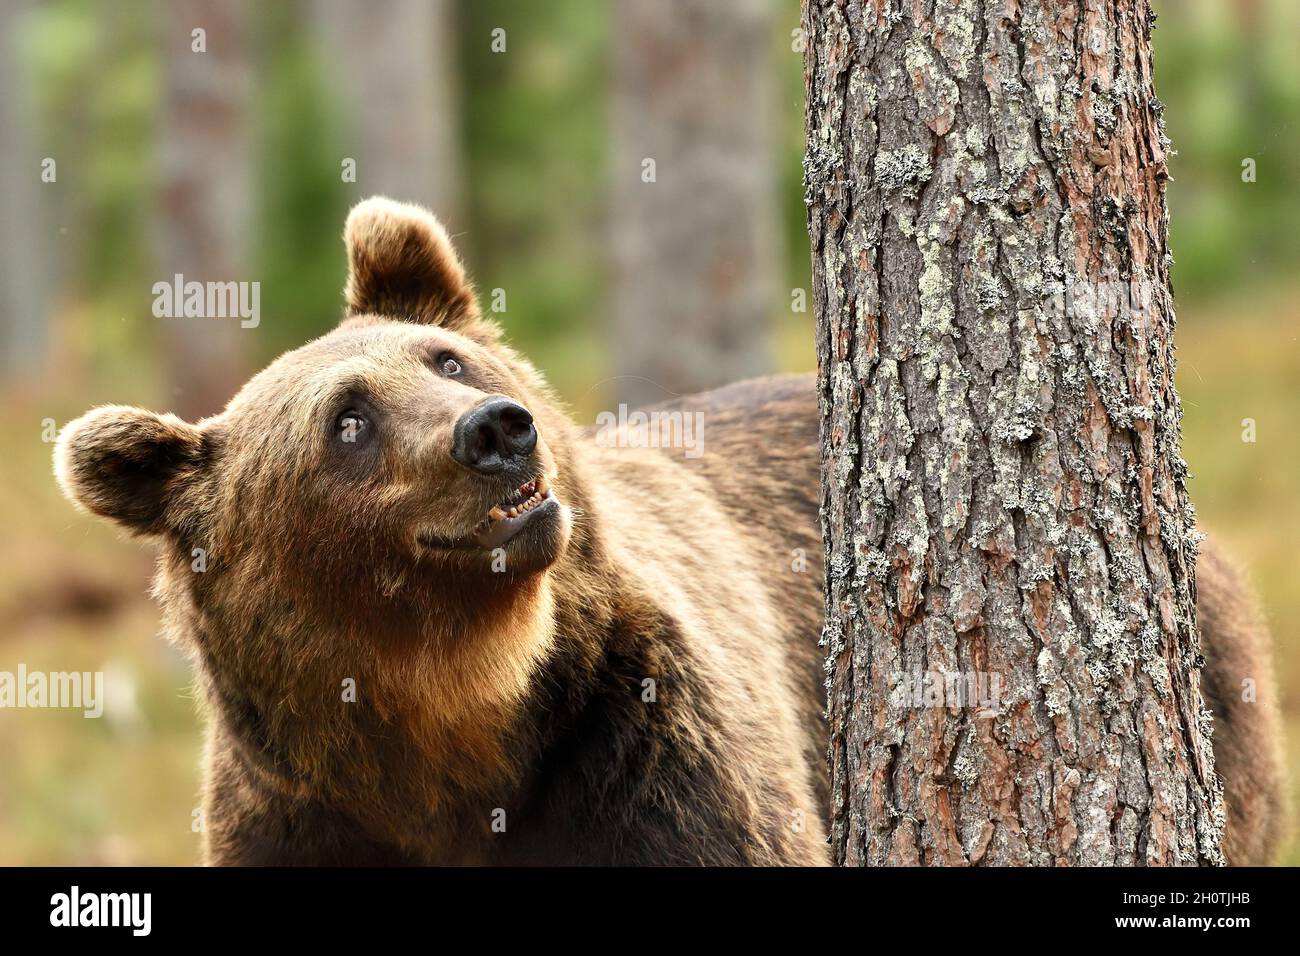 Brown bear next to the tree in the forest Stock Photo